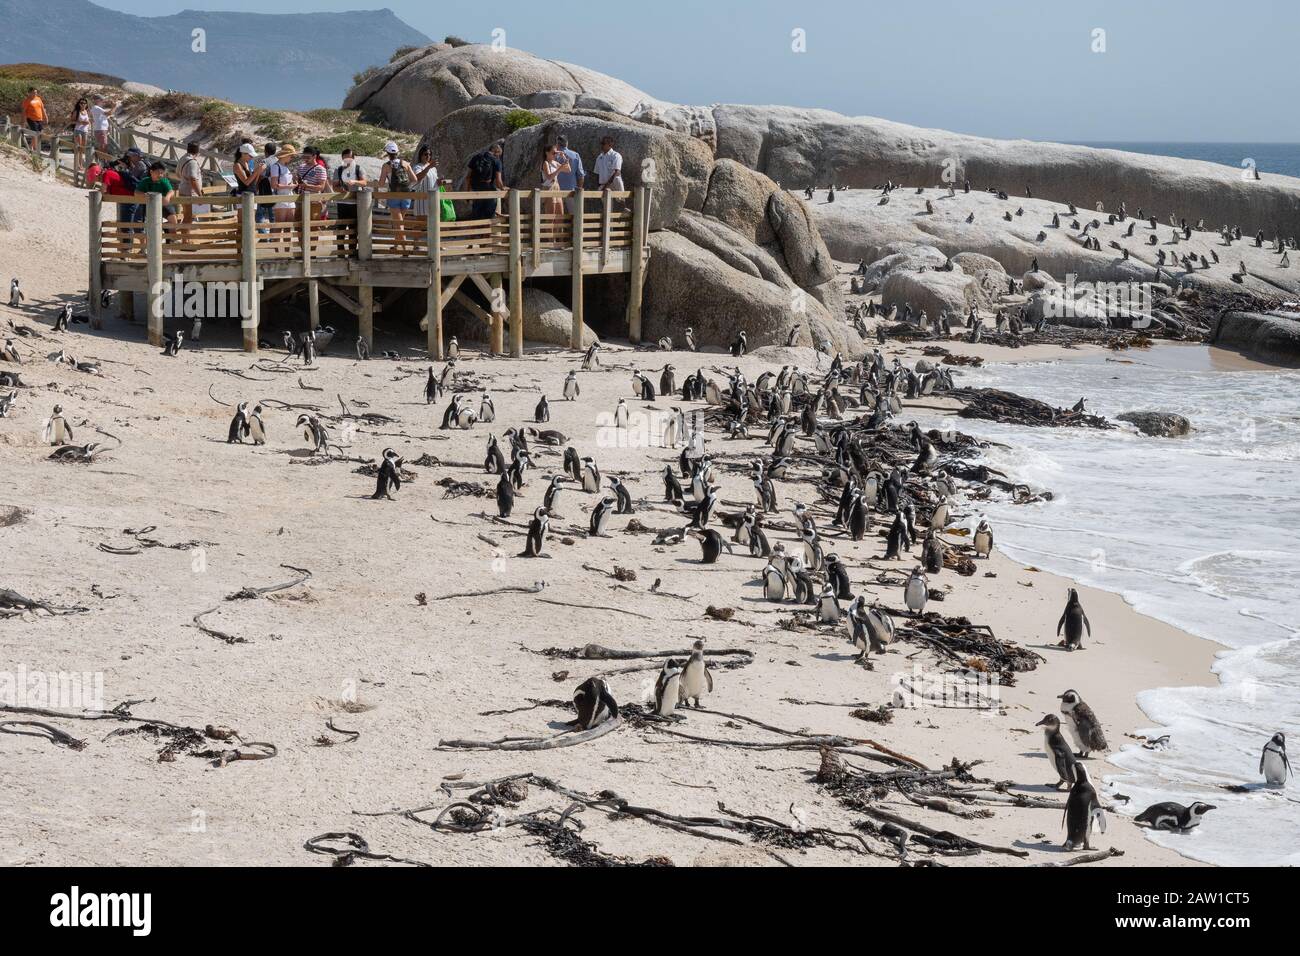 Tourists watch African penguins from viewing platform at Boulders Beach, Table Mountain National Park, Simonstown, Cape Town, South Africa. Stock Photo